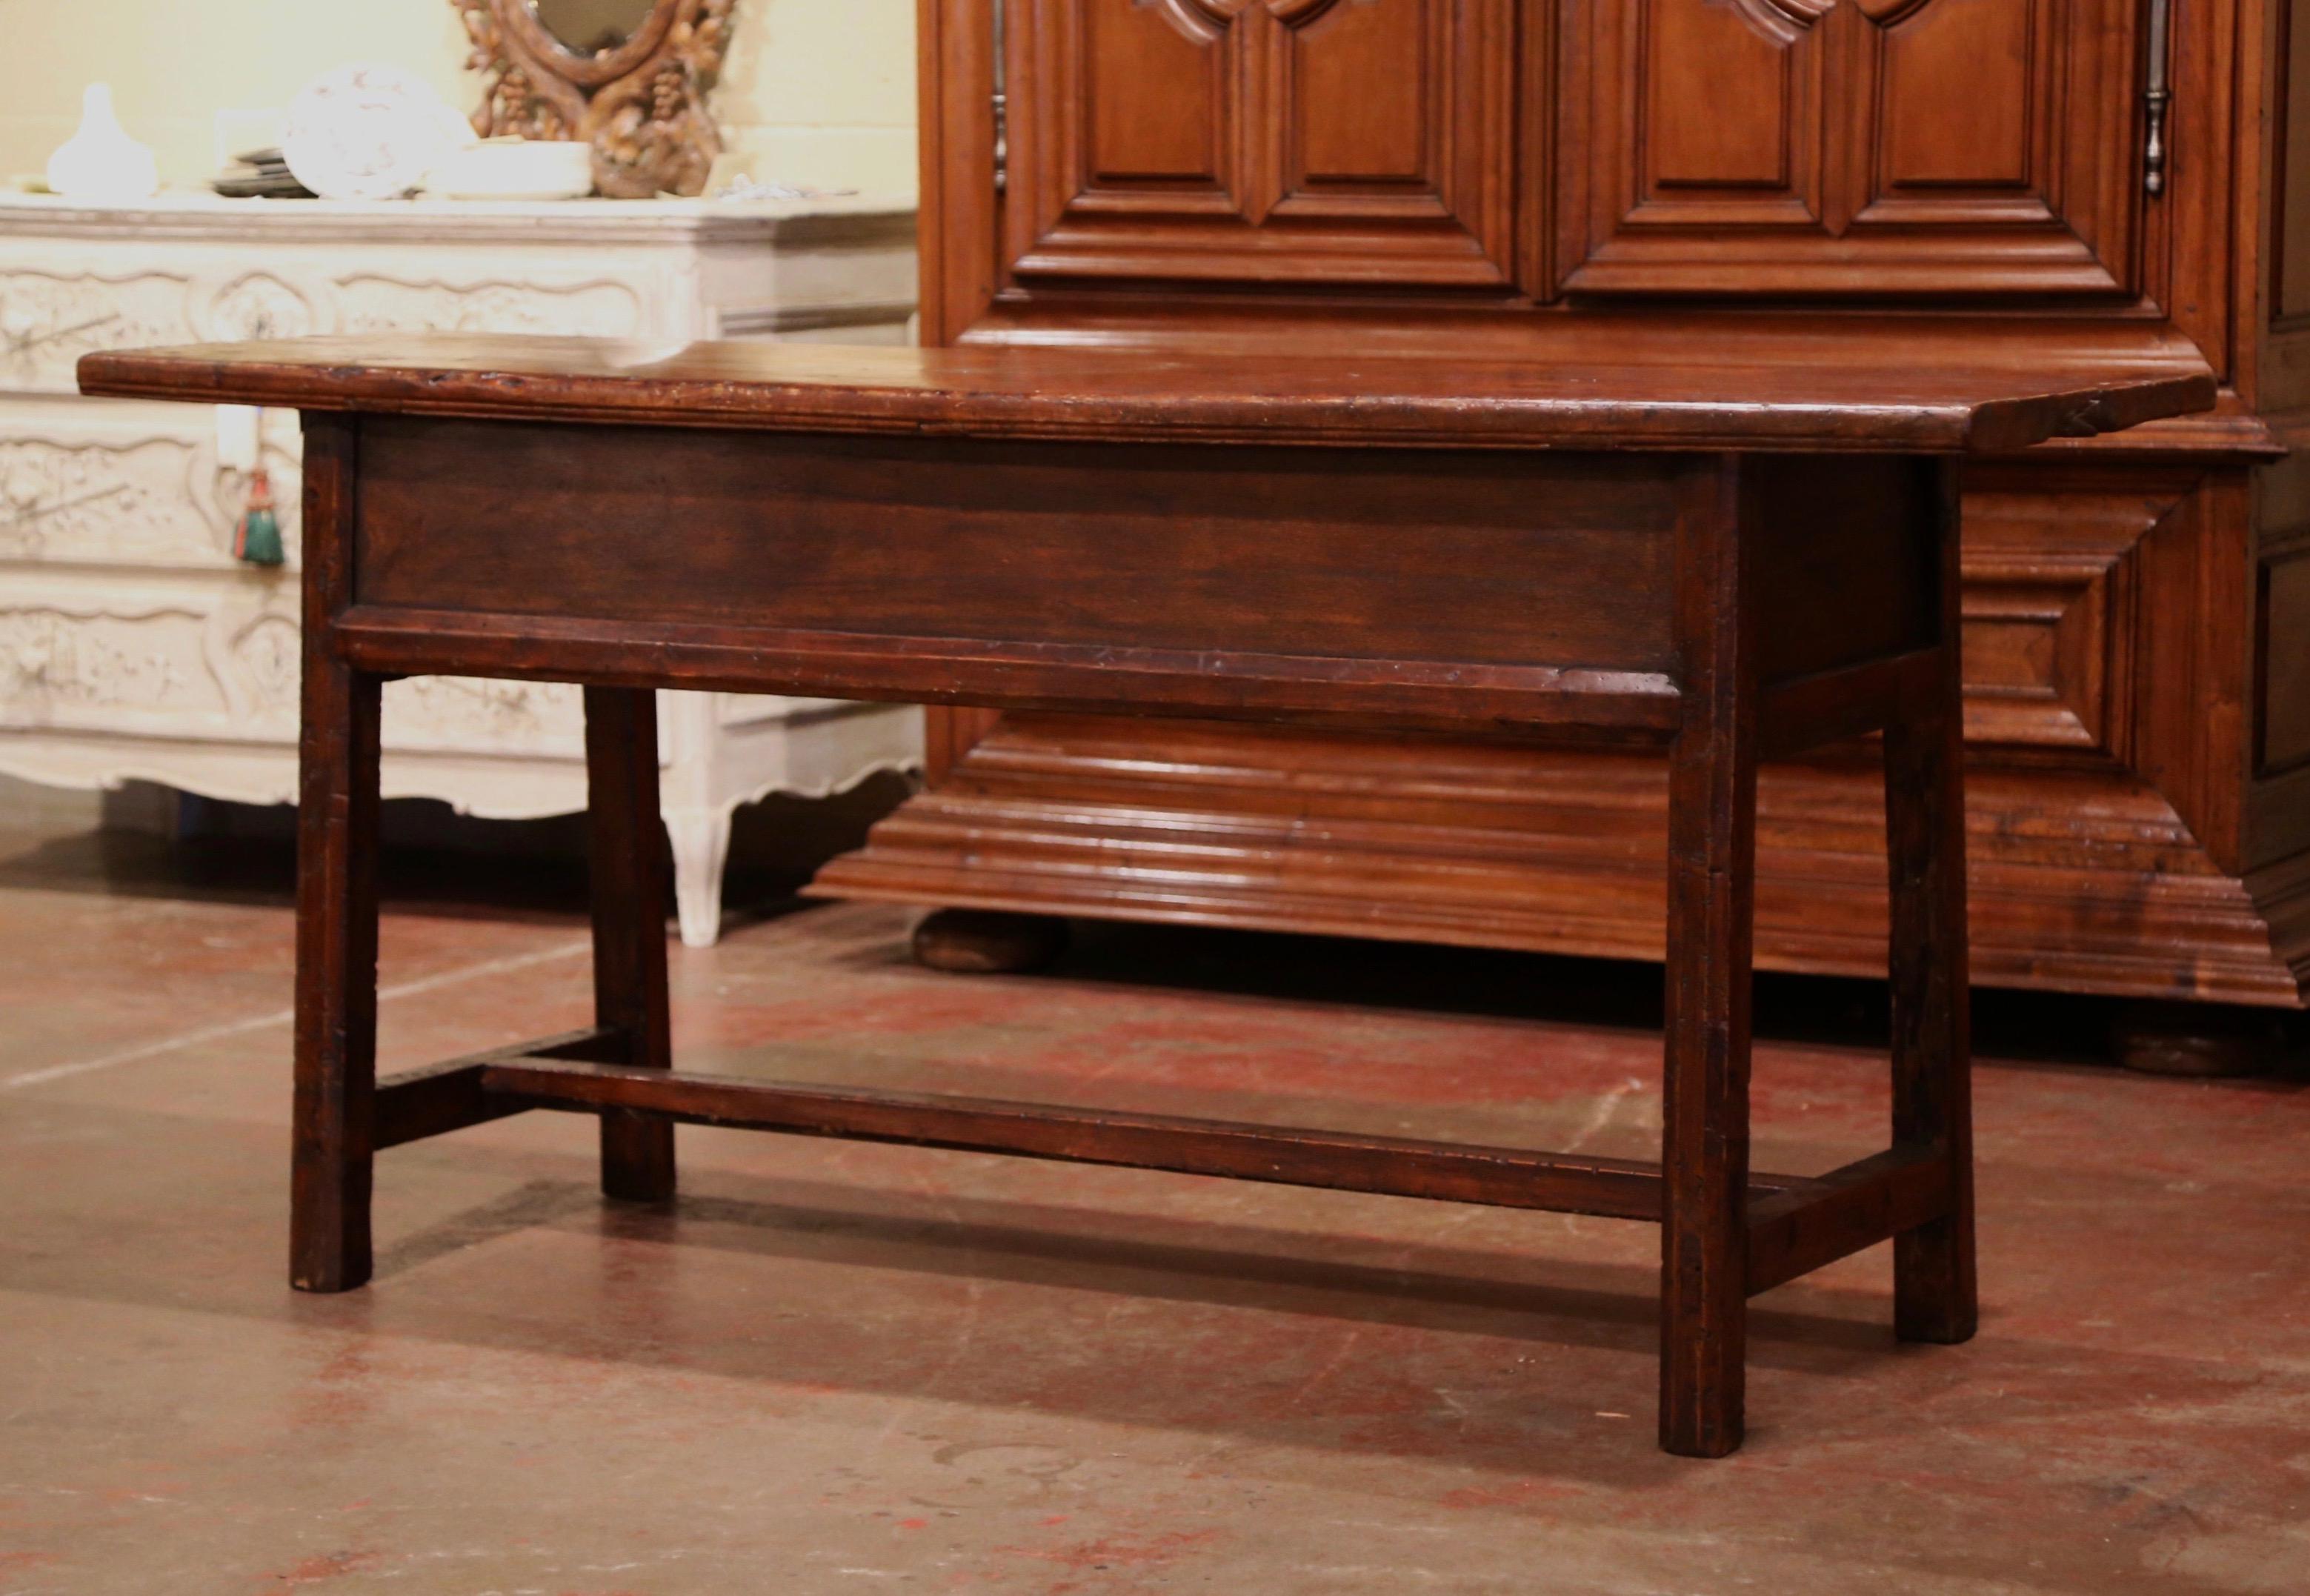 19th Century Spanish Colonial Carved Walnut Console Table with Drawers 4